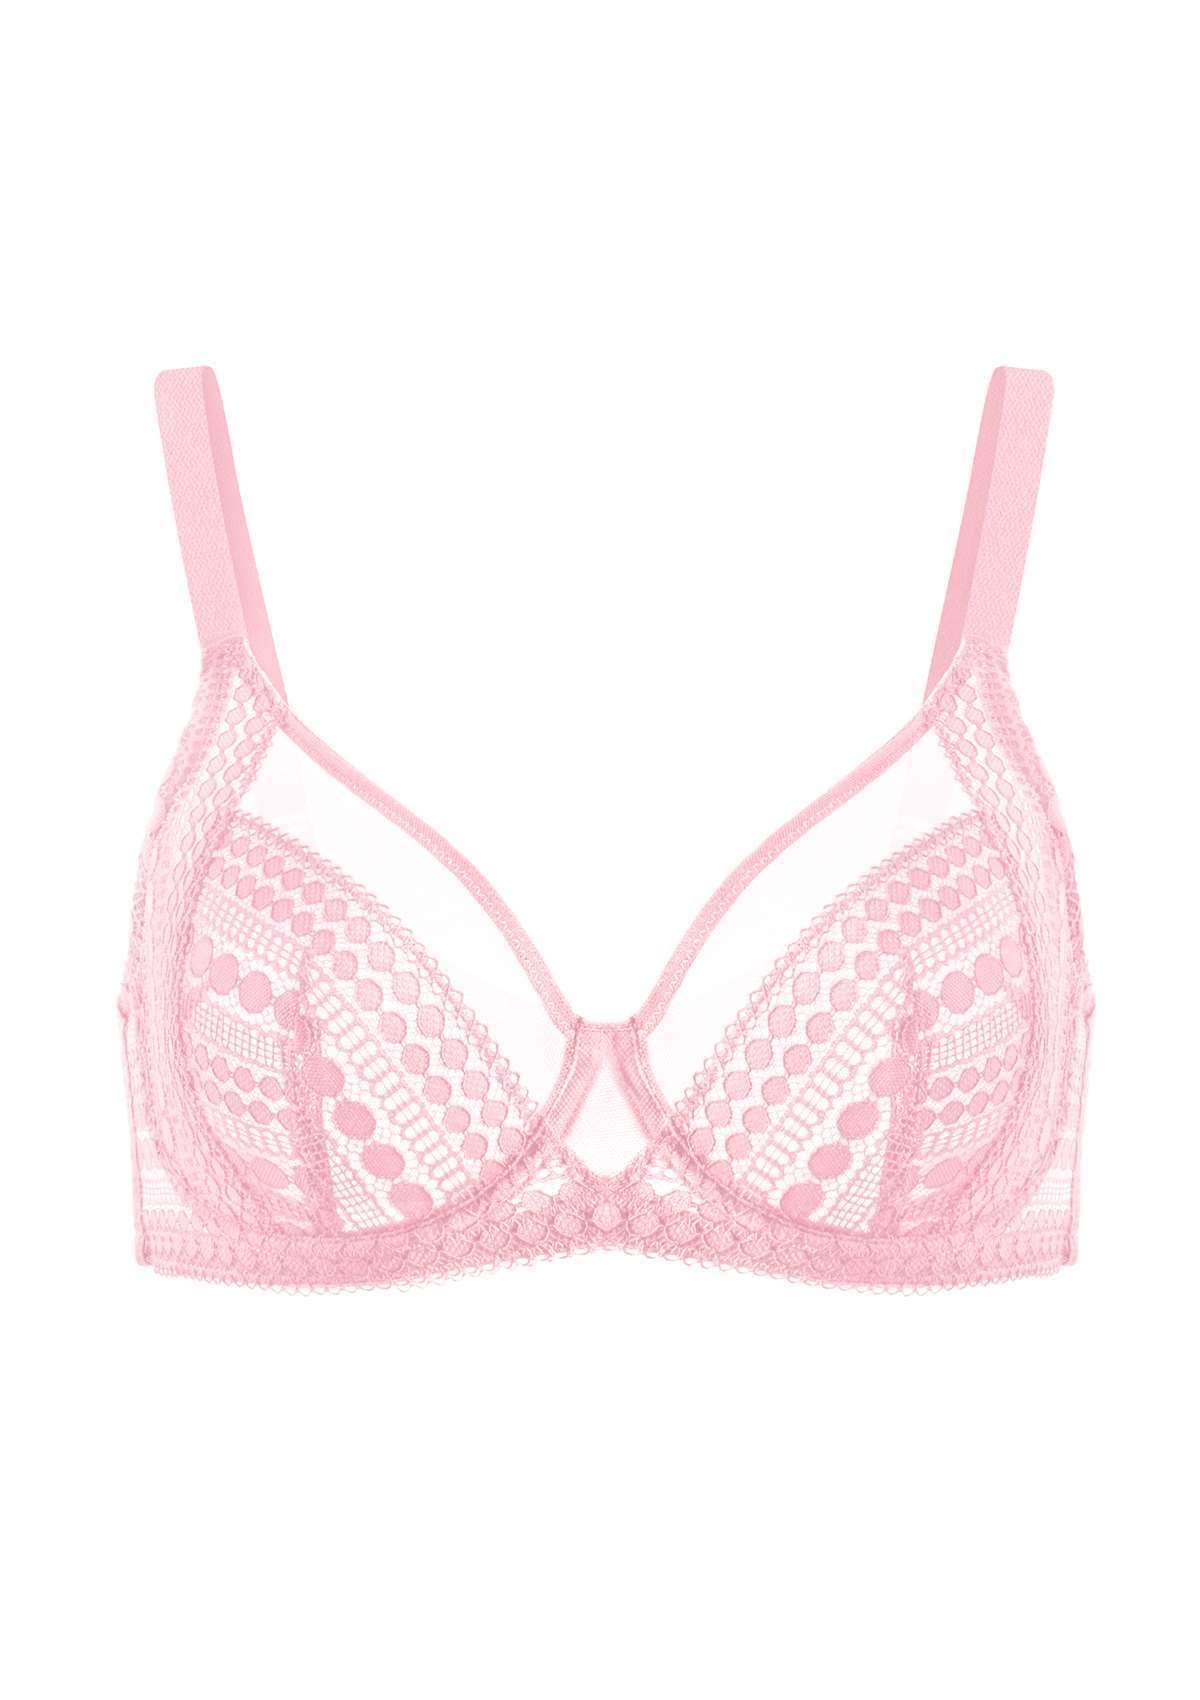 HSIA Heroine Lace Bra And Panties Set: Most Comfortable Supportive Bra - Pink / 44 / D